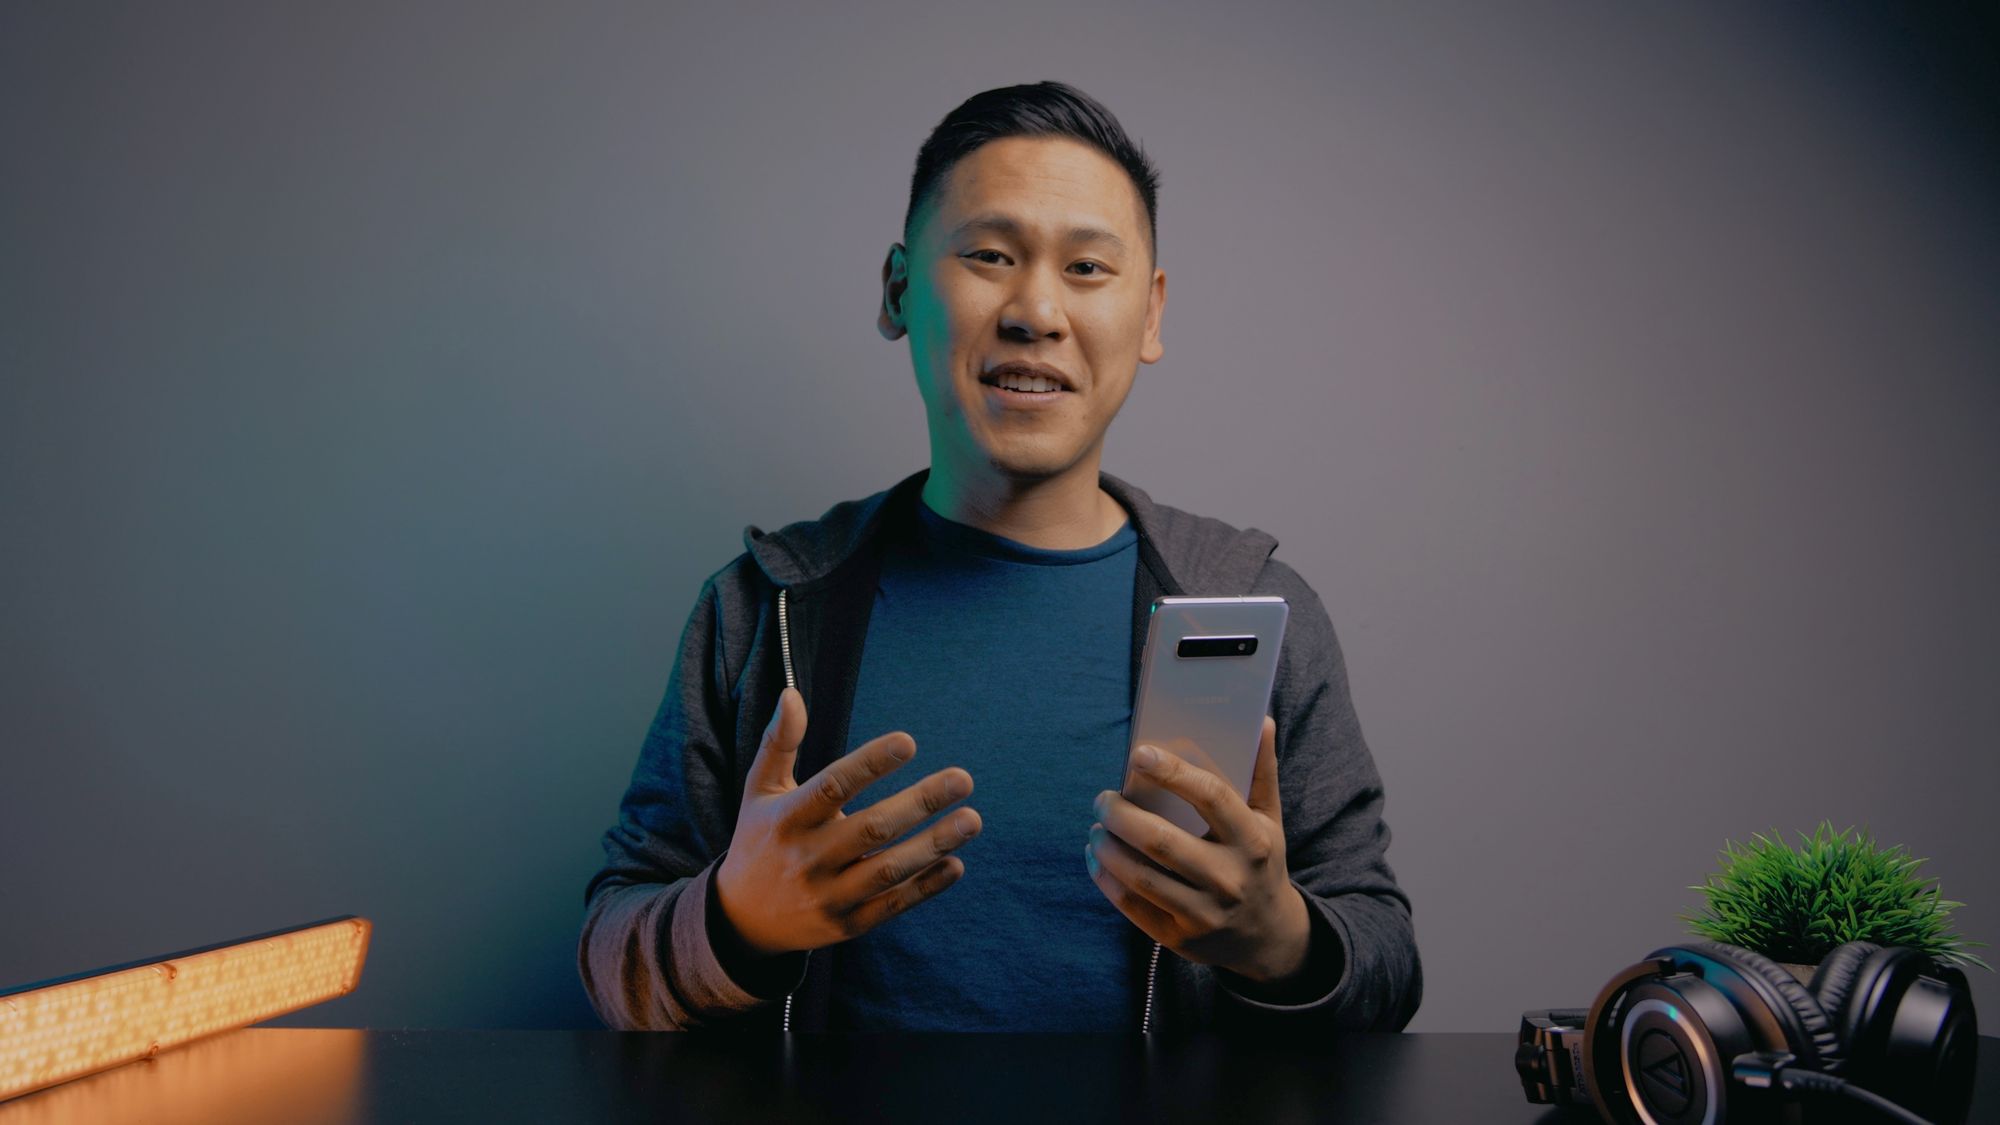 15 Tips & Tricks For Your New Samsung Galaxy S10, S10+ or S10e